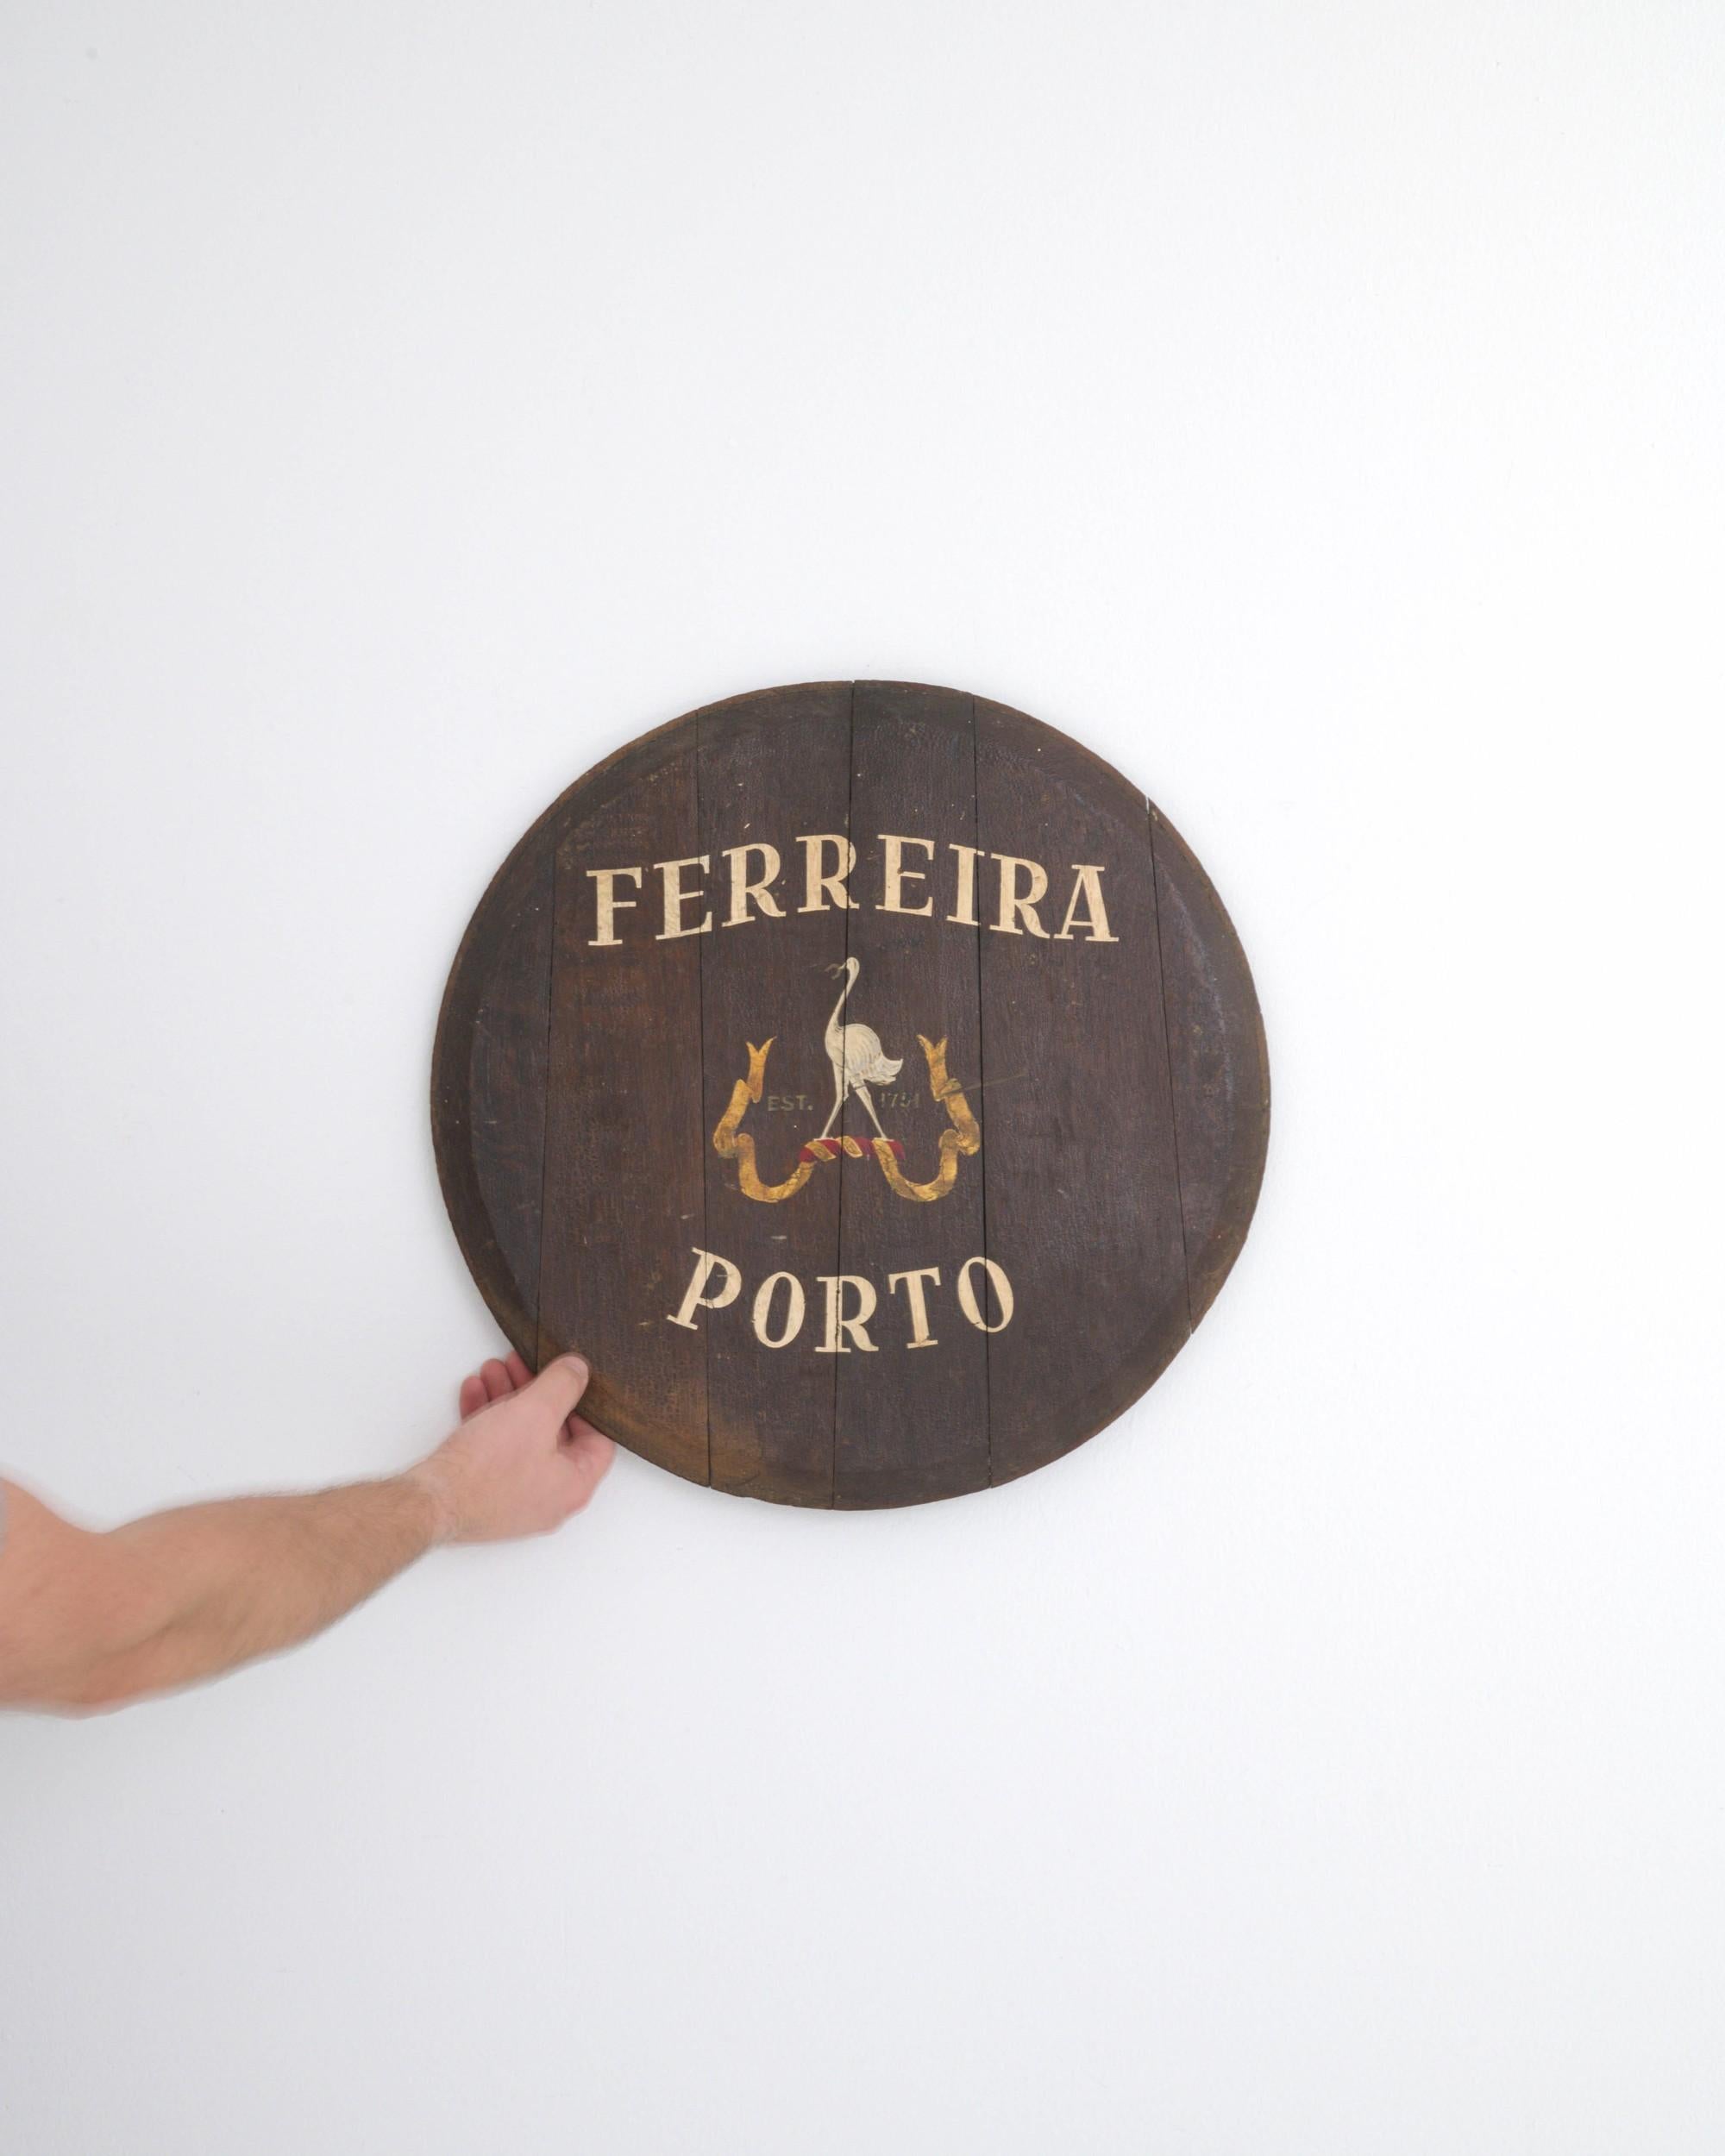 Dating back to the 20th century, this authentic wooden wall decoration, a barrel lid, is a vintage rarity from Portugal. It showcases a painted heron with a horseshoe in its beak, positioned on a yellow-red ribbon that frames the year 1751 with